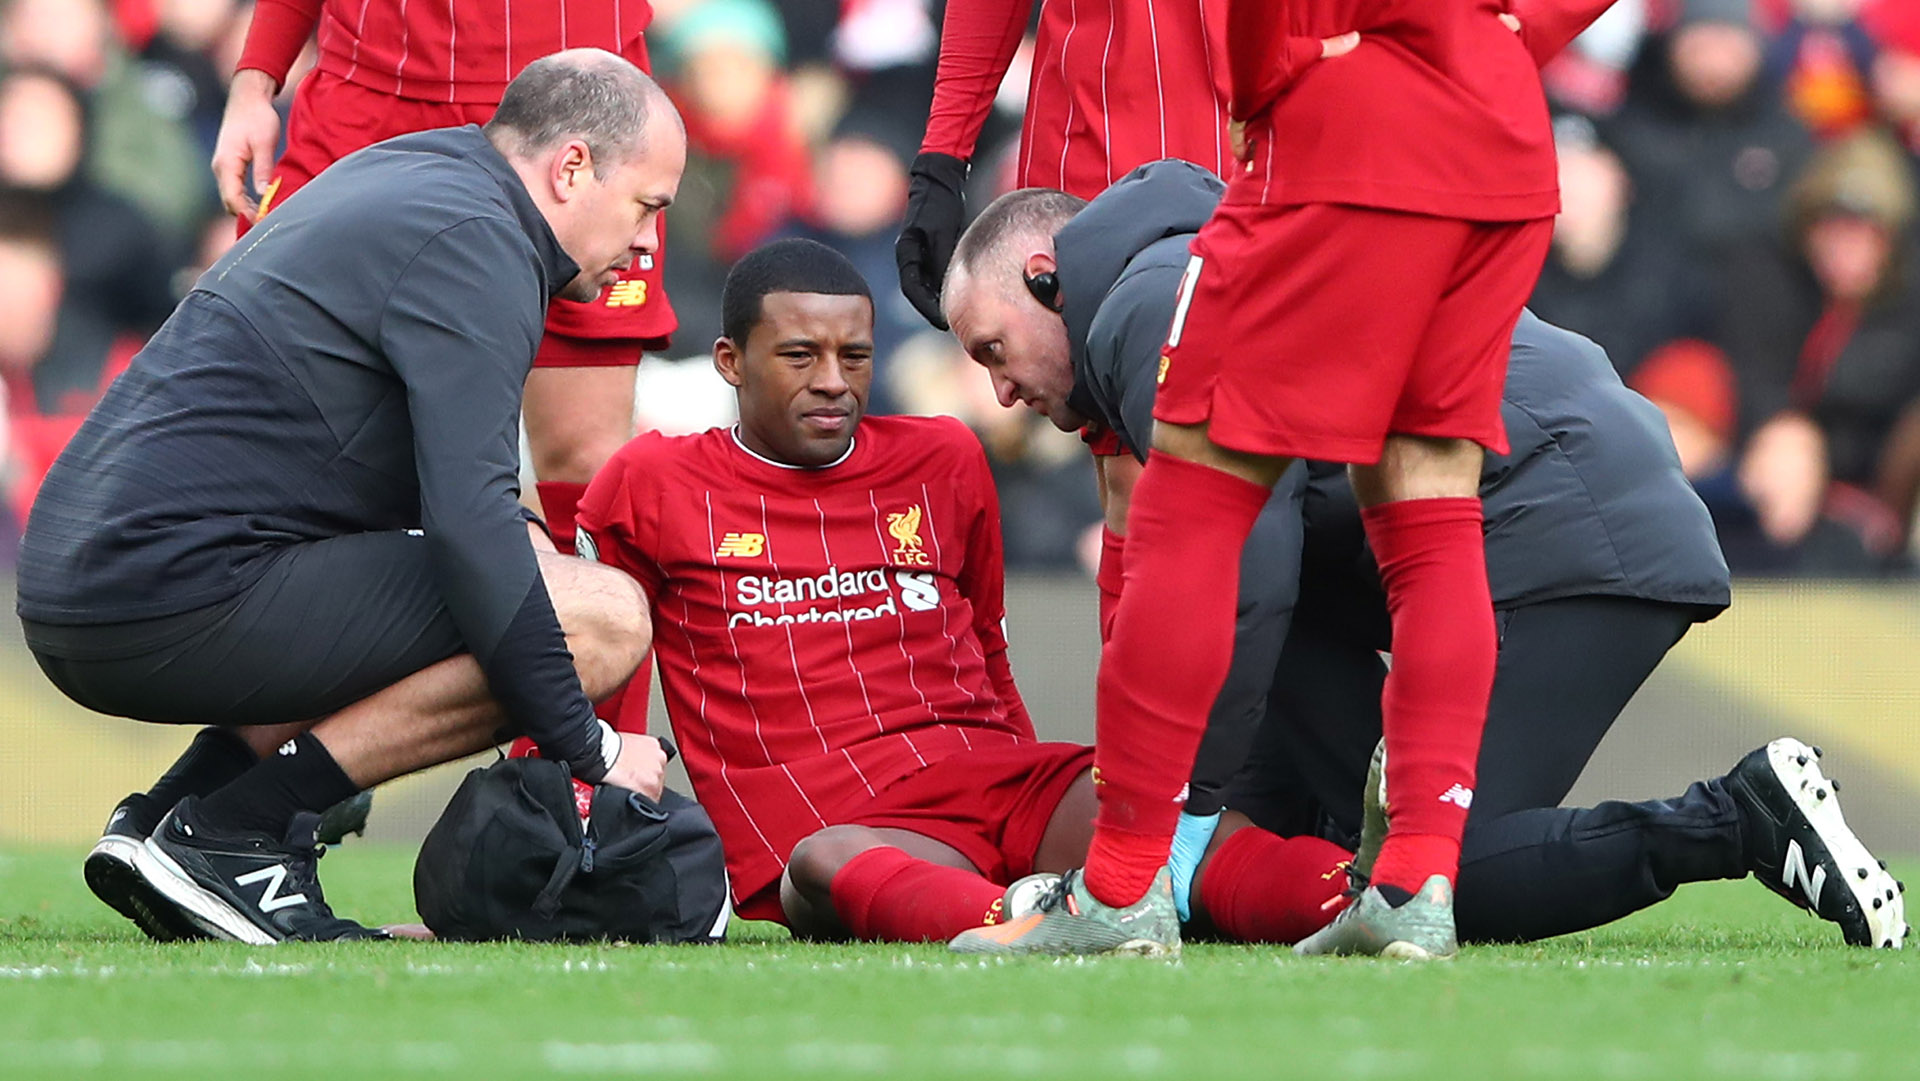 Wijnaldum named in Liverpool squad for Club World Cup despite Watford injury